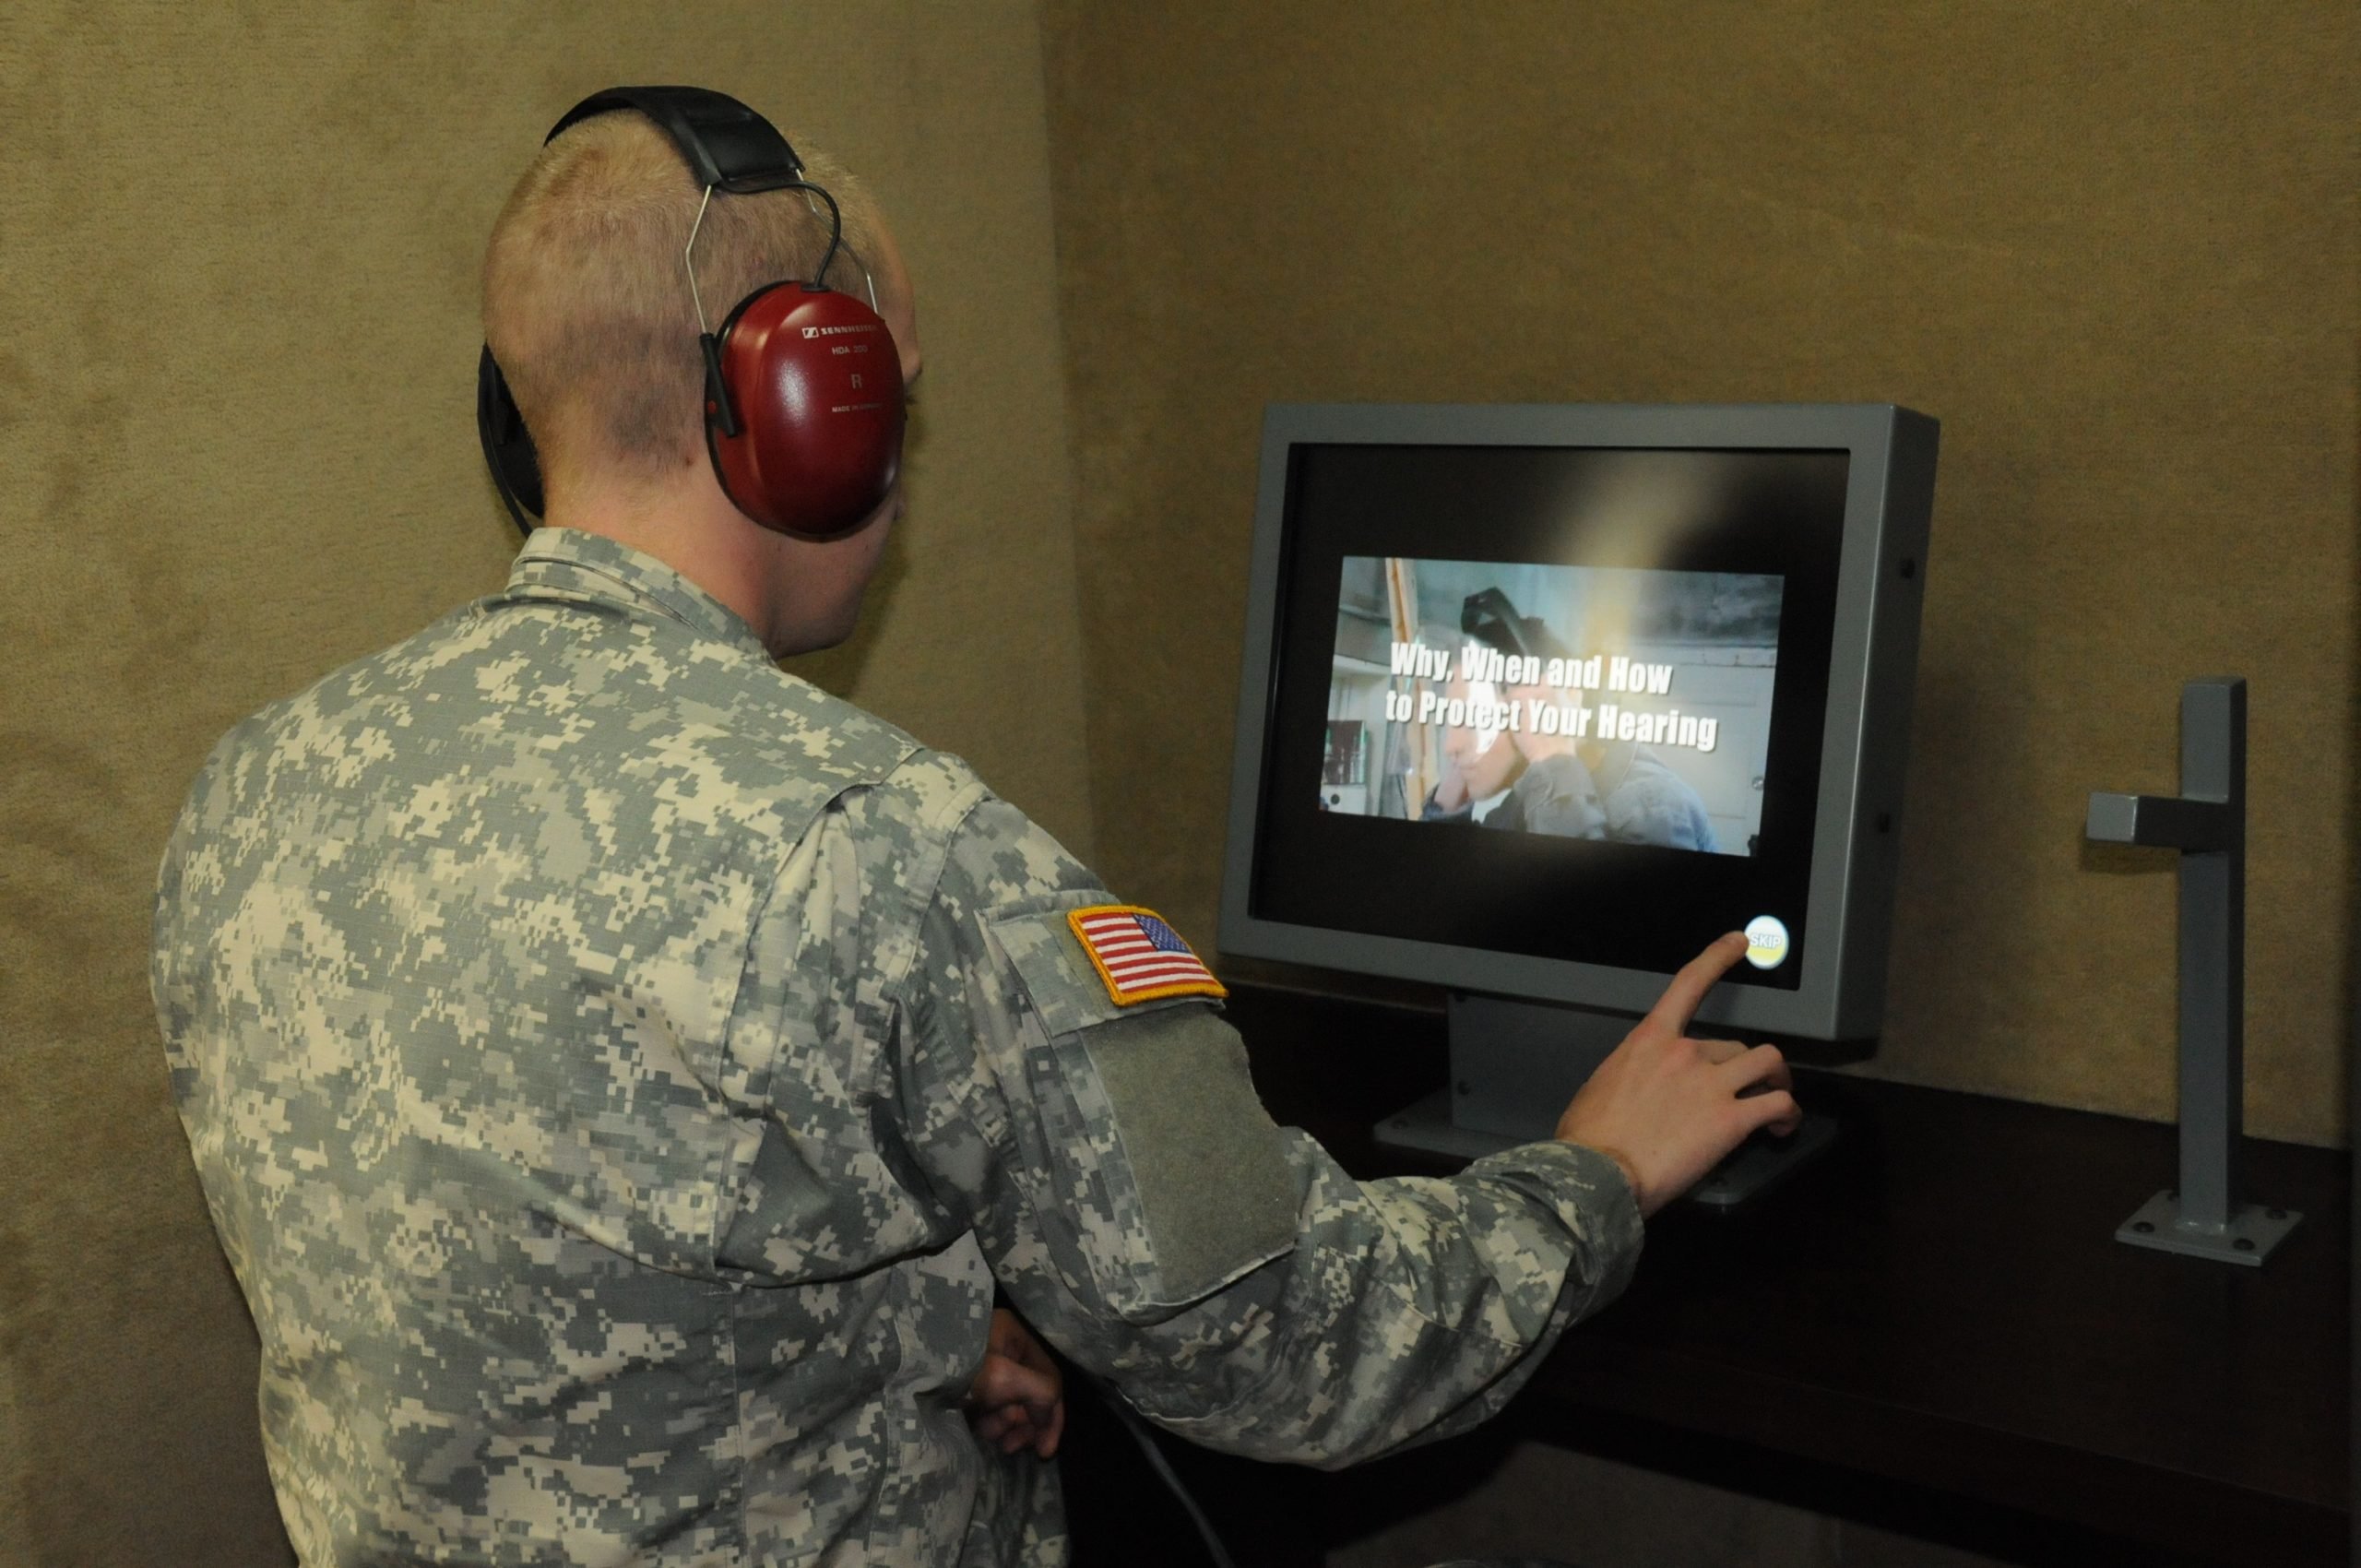 i can hear you now sound exhibit tests hearing scaled